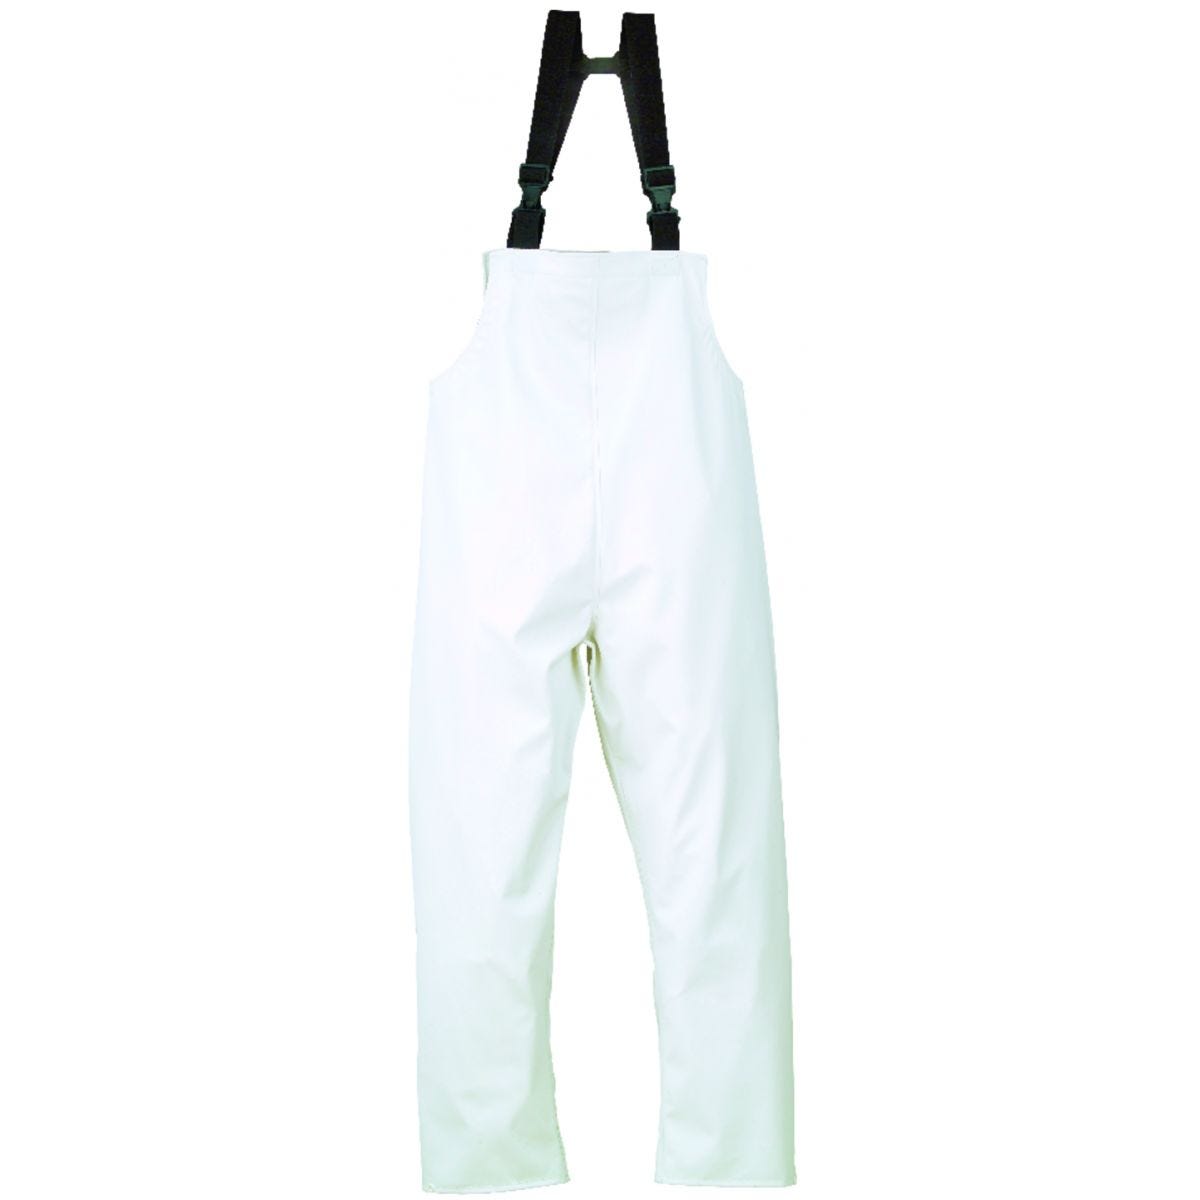 FOOD Cotte PU Blanc - COVERGUARD - Taille XL 0